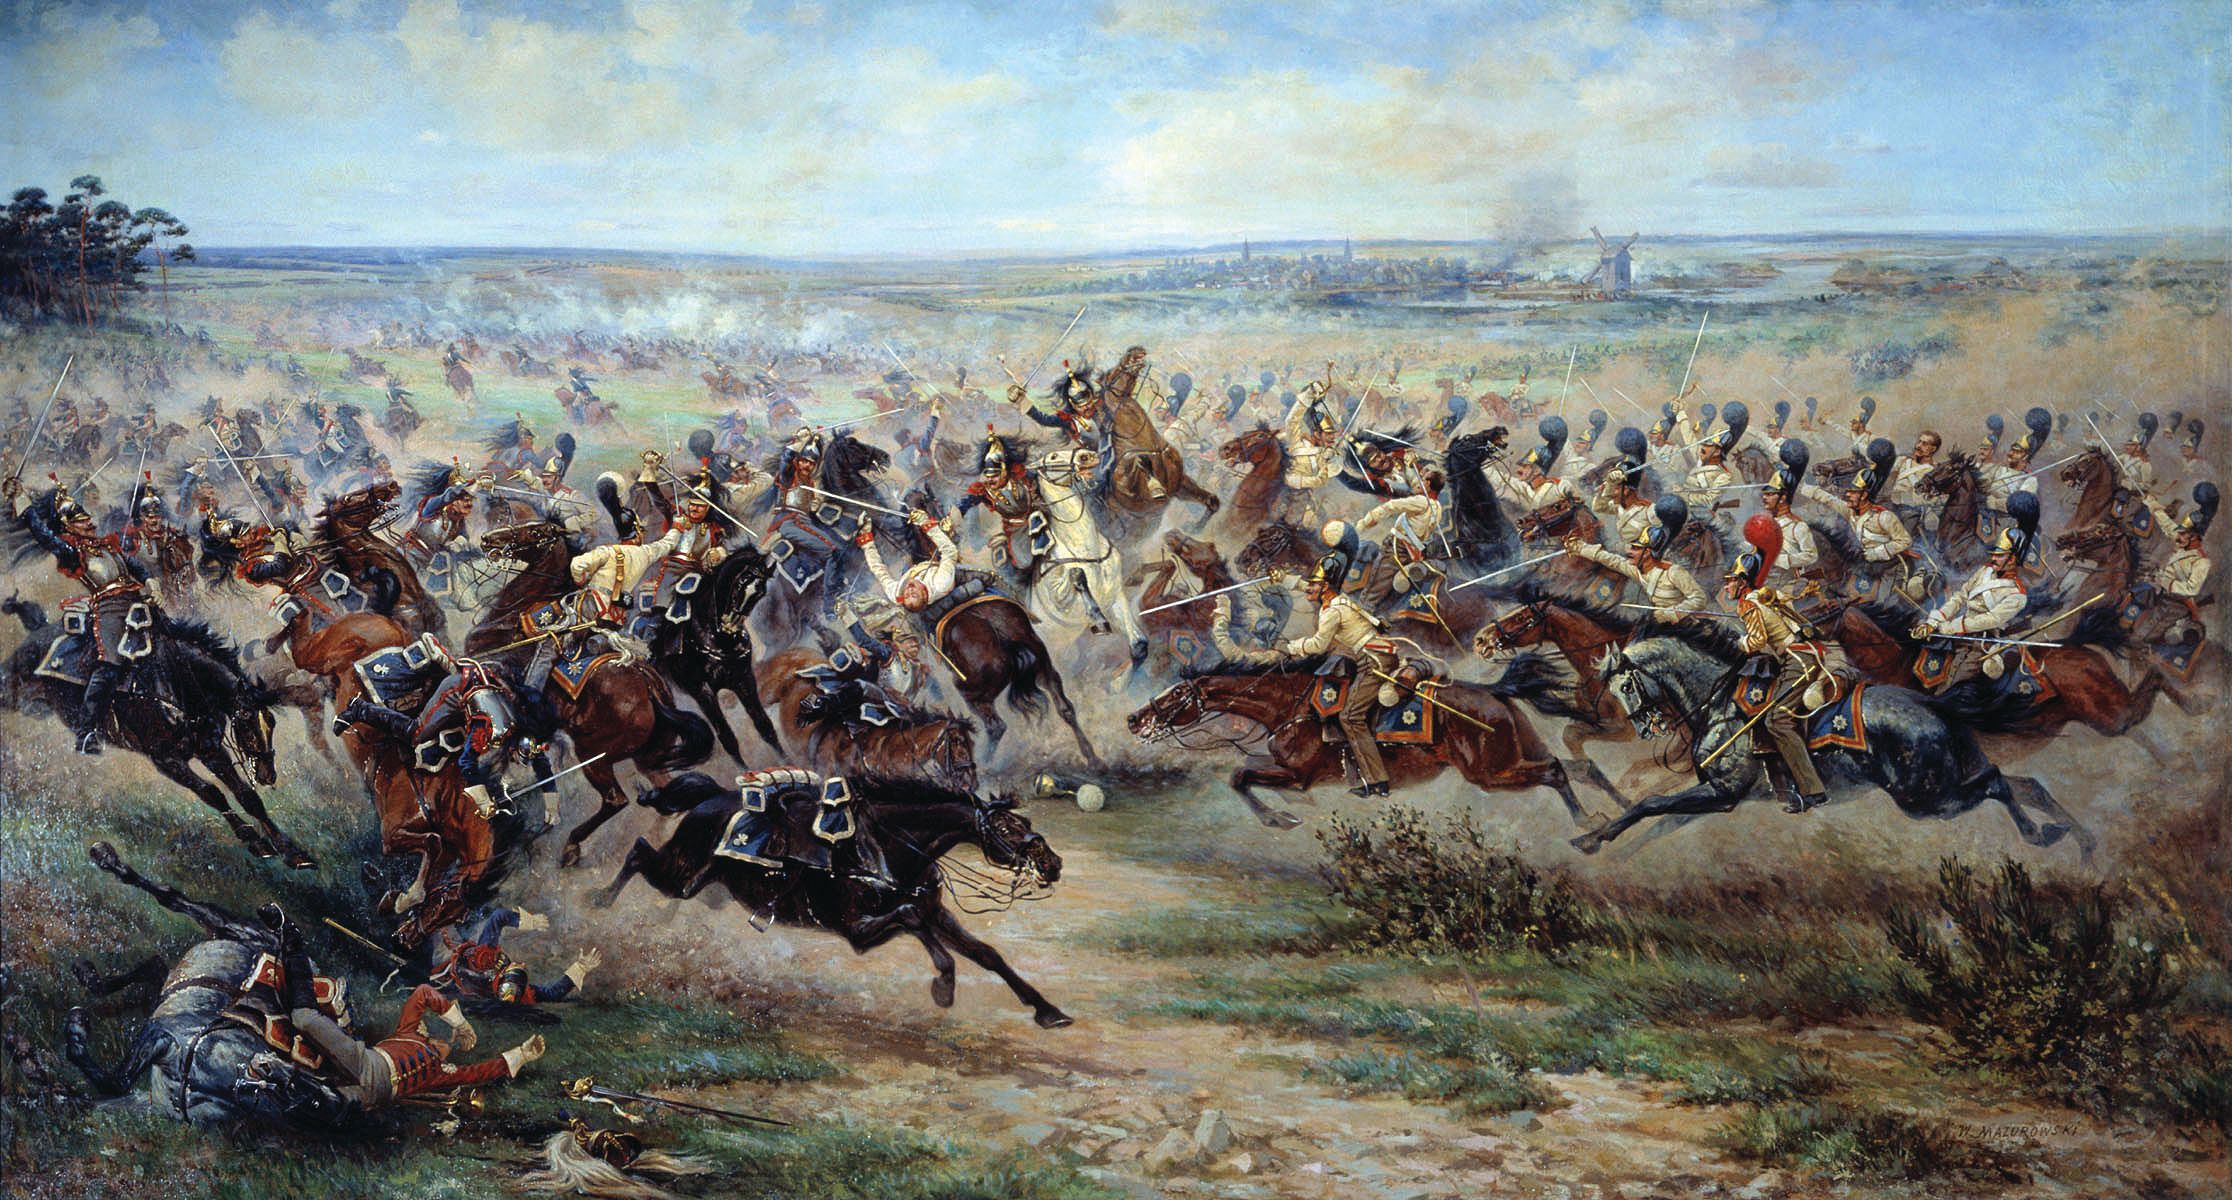 Russian Imperial Guard cavalry attacks at the Battle of Guttstadt-Deppen before Friedland. General Count Levin Bennigsen saw an opportunity to isolate and destroy Marshal Michel Ney’s exposed corps, but Ney slipped through the trap.